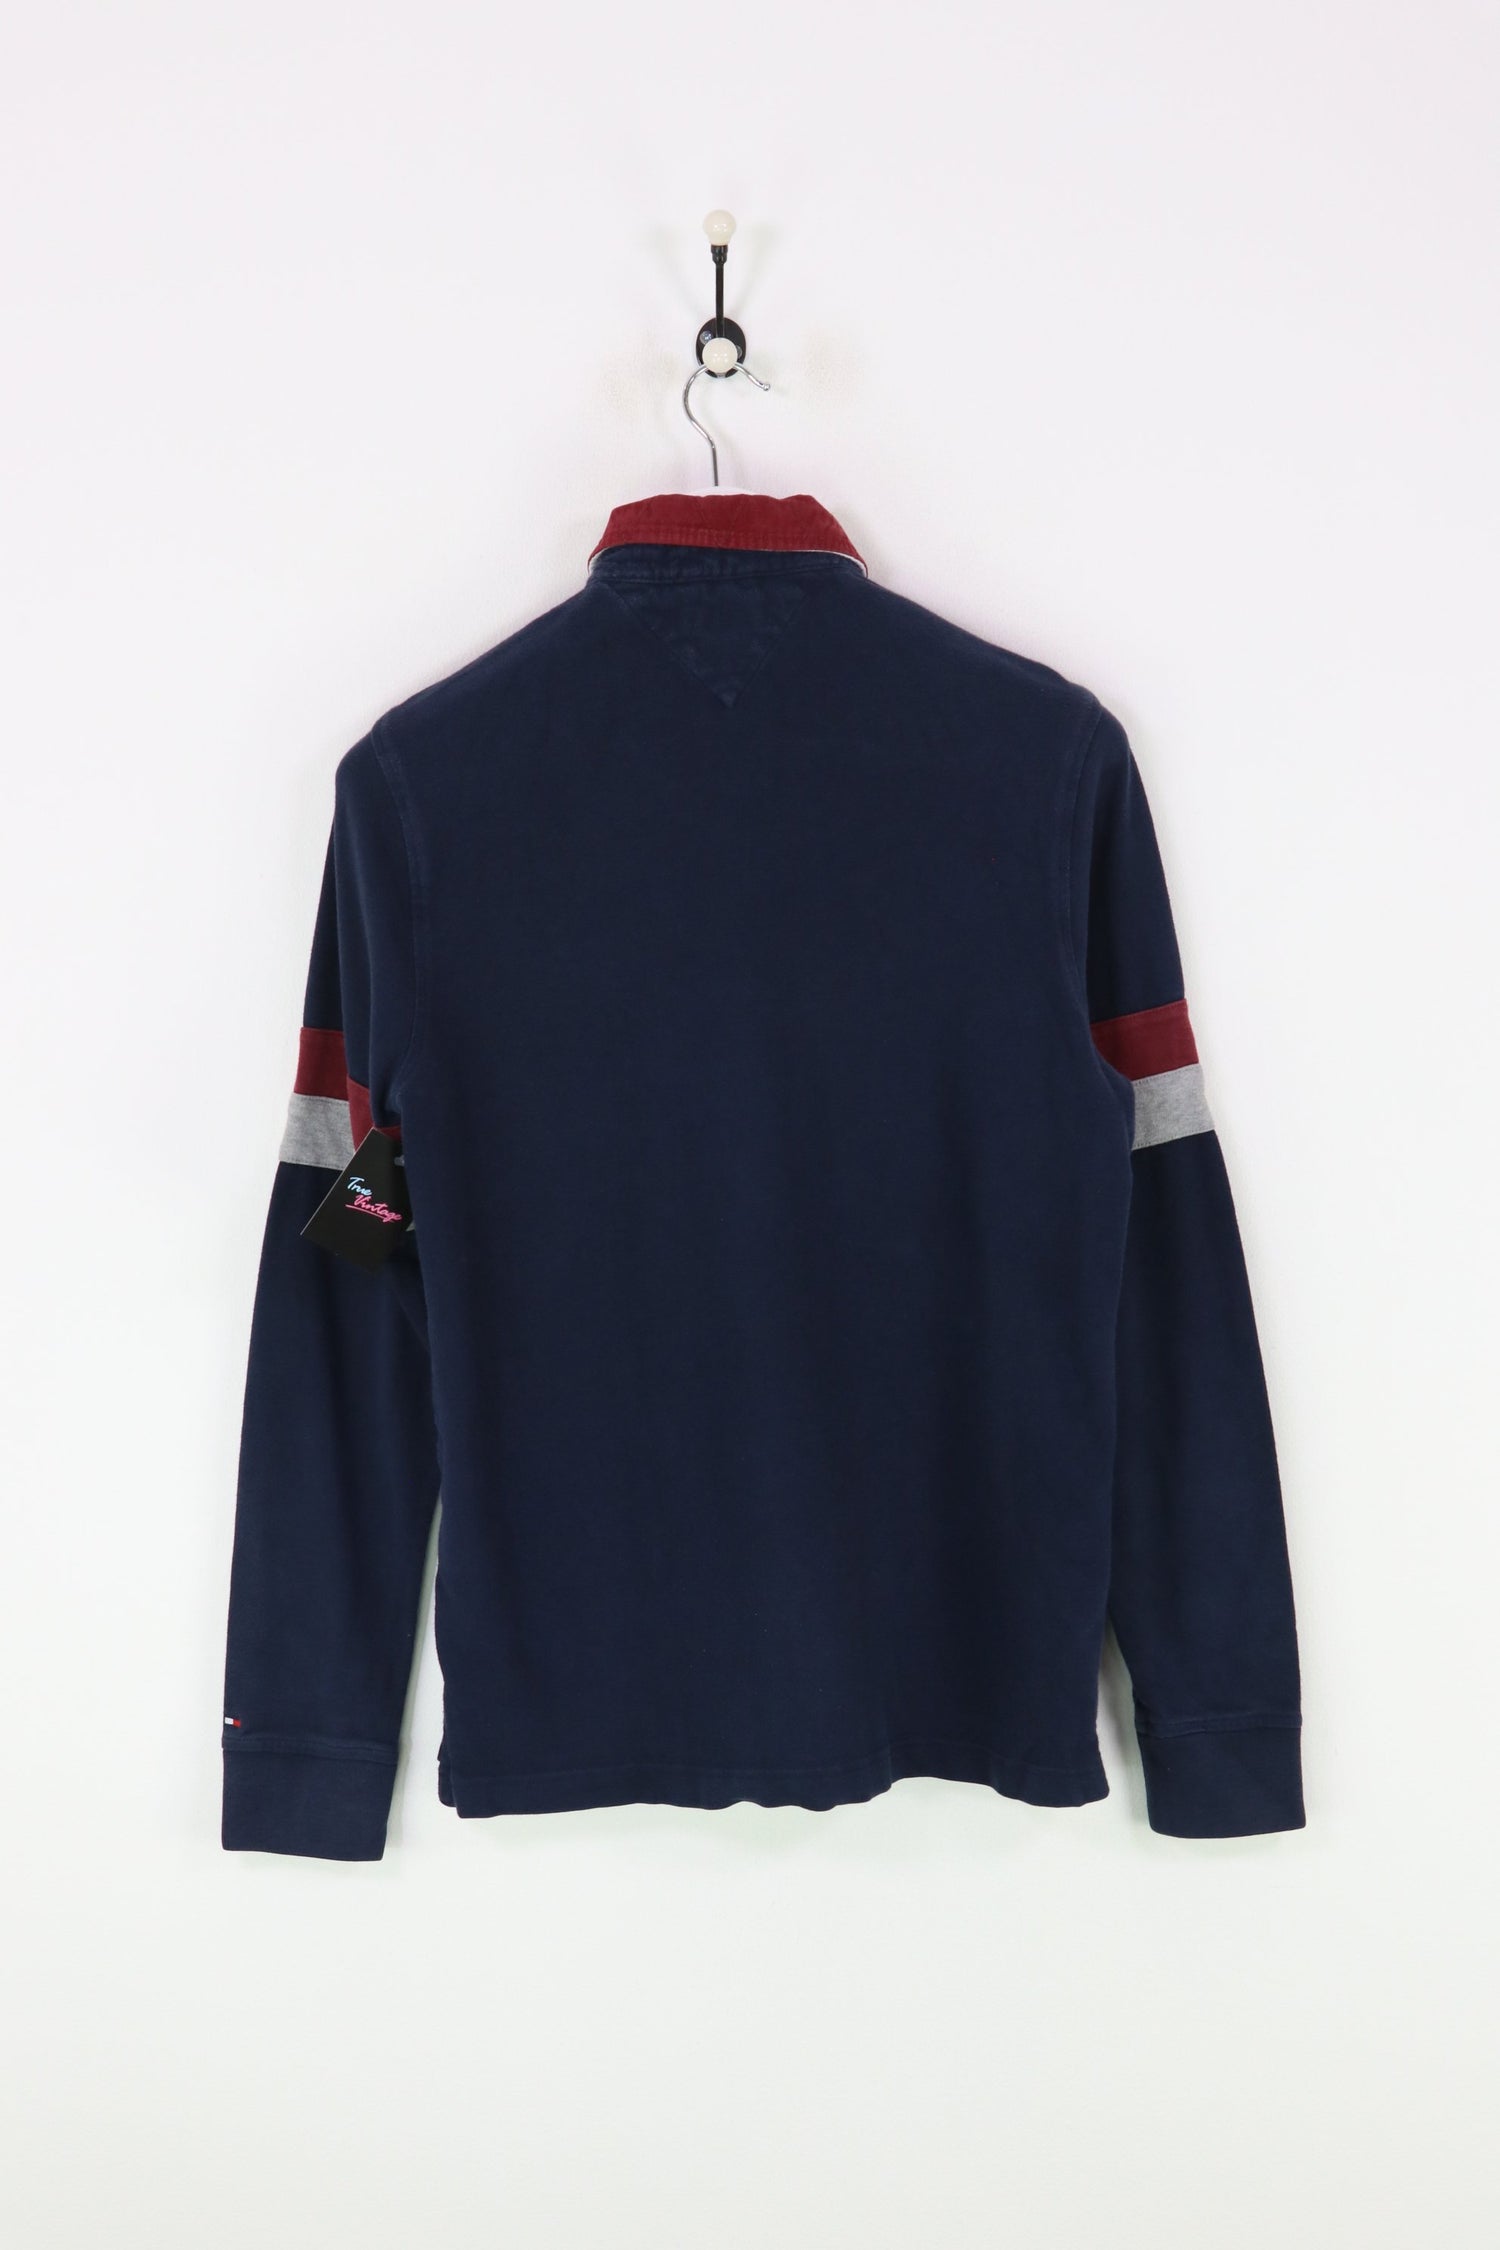 Tommy Hilfiger Rugby Top Navy Small